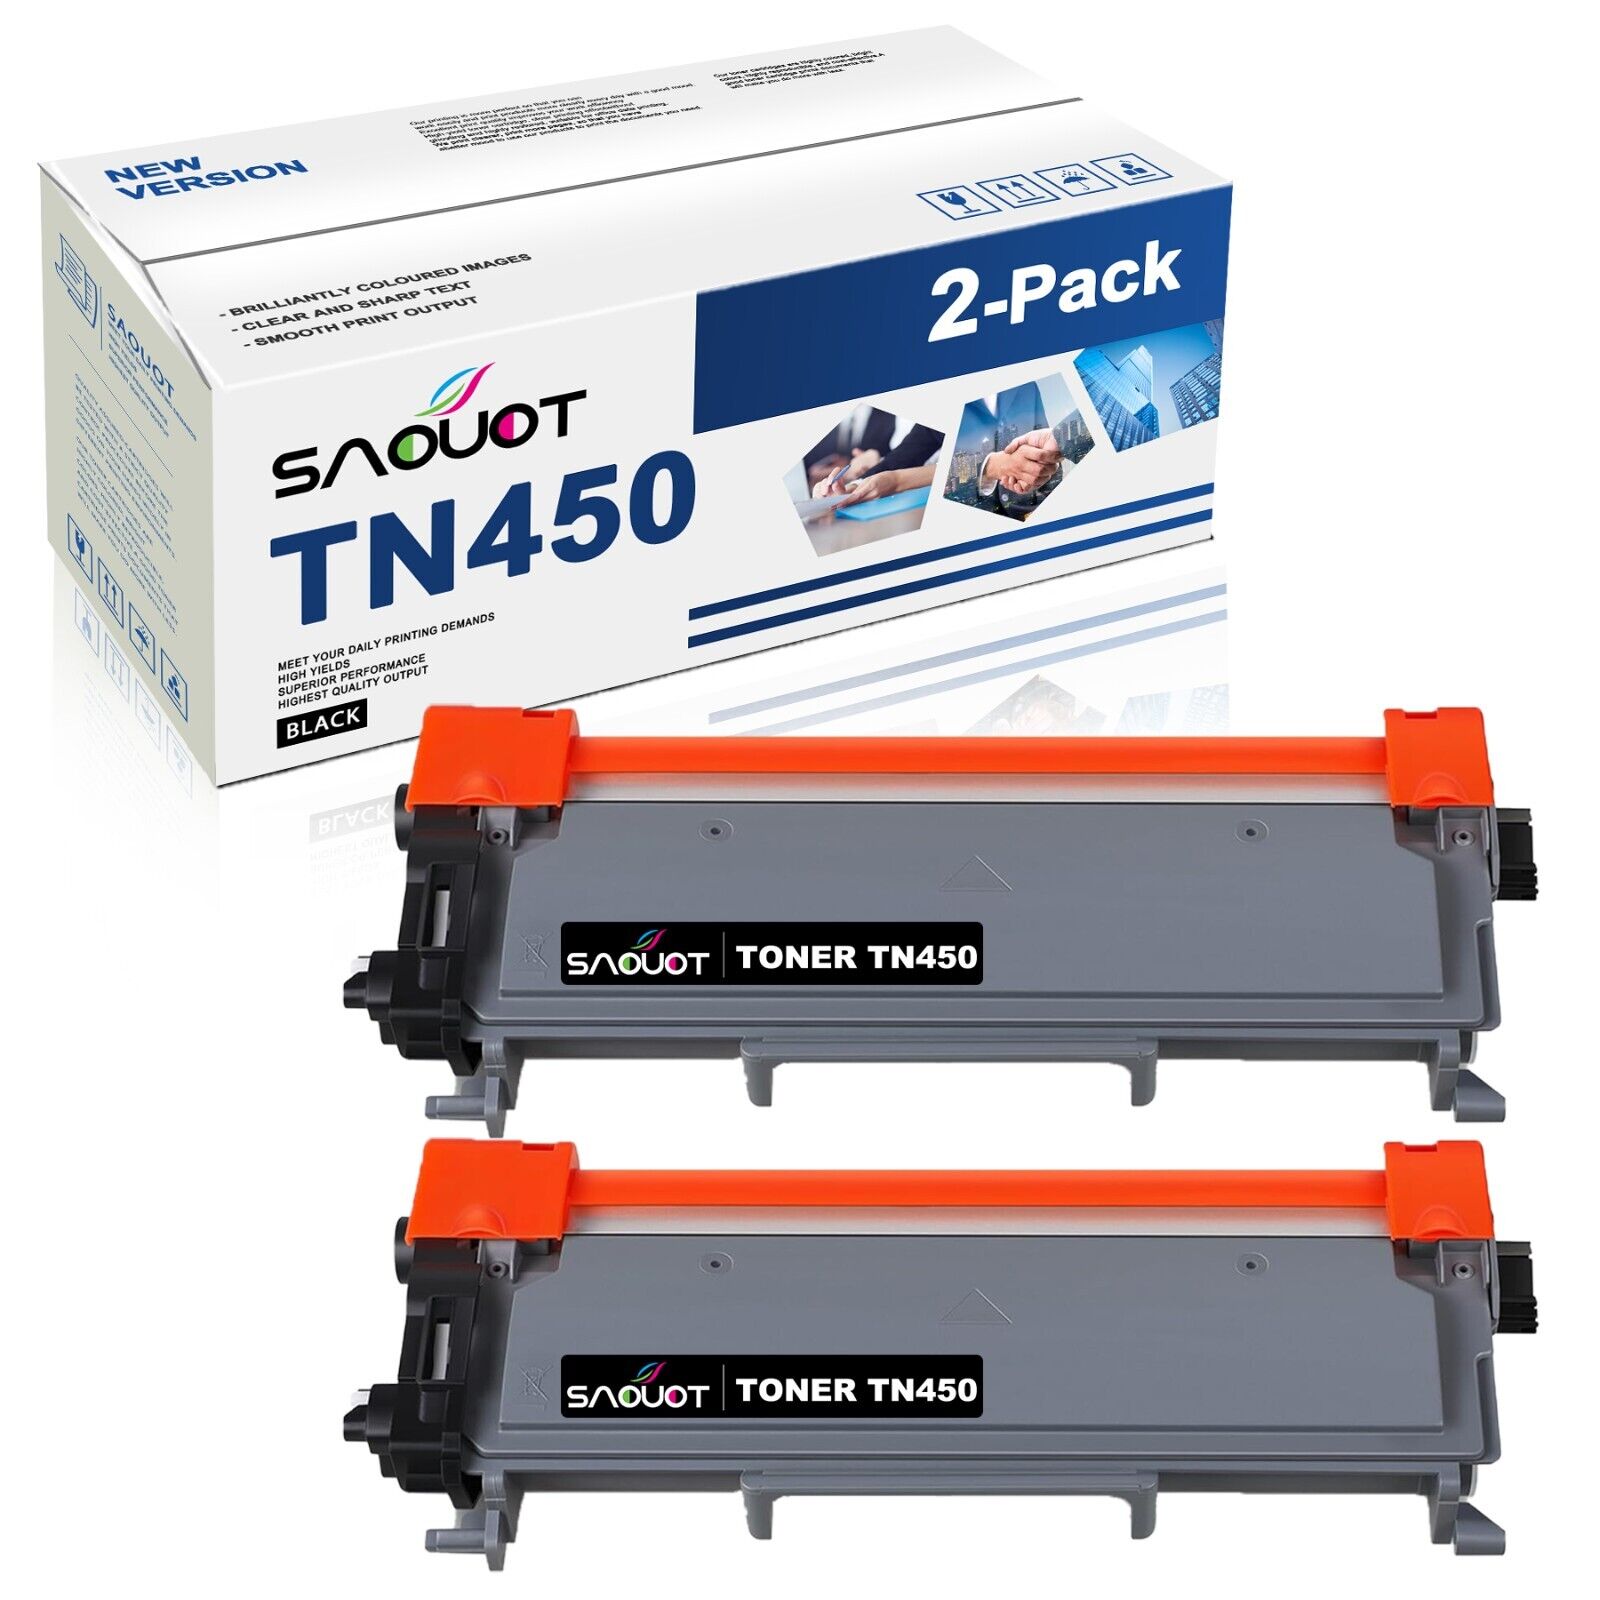 TN-450 TN 450 Toner Cartridge black Replacement for Brother TN450 HL-2240 2280DW